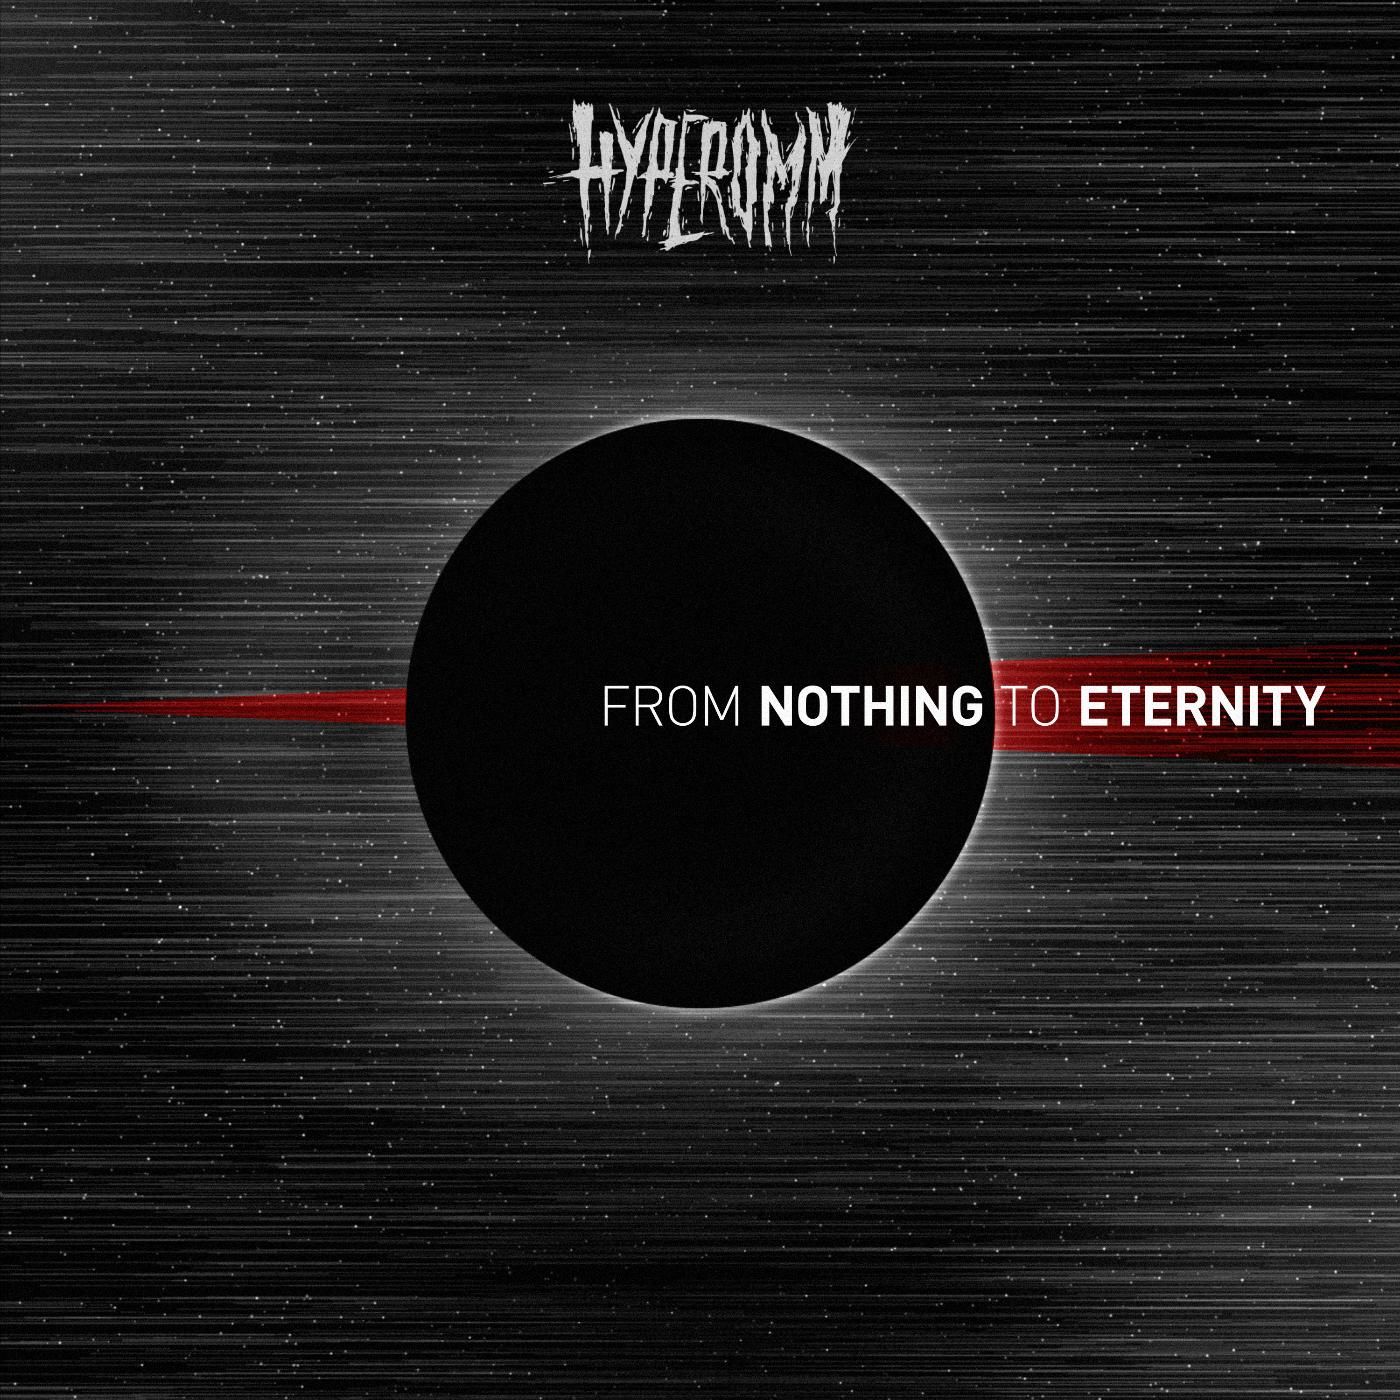 Hyperomm - From Nothing To Eternity (2017)